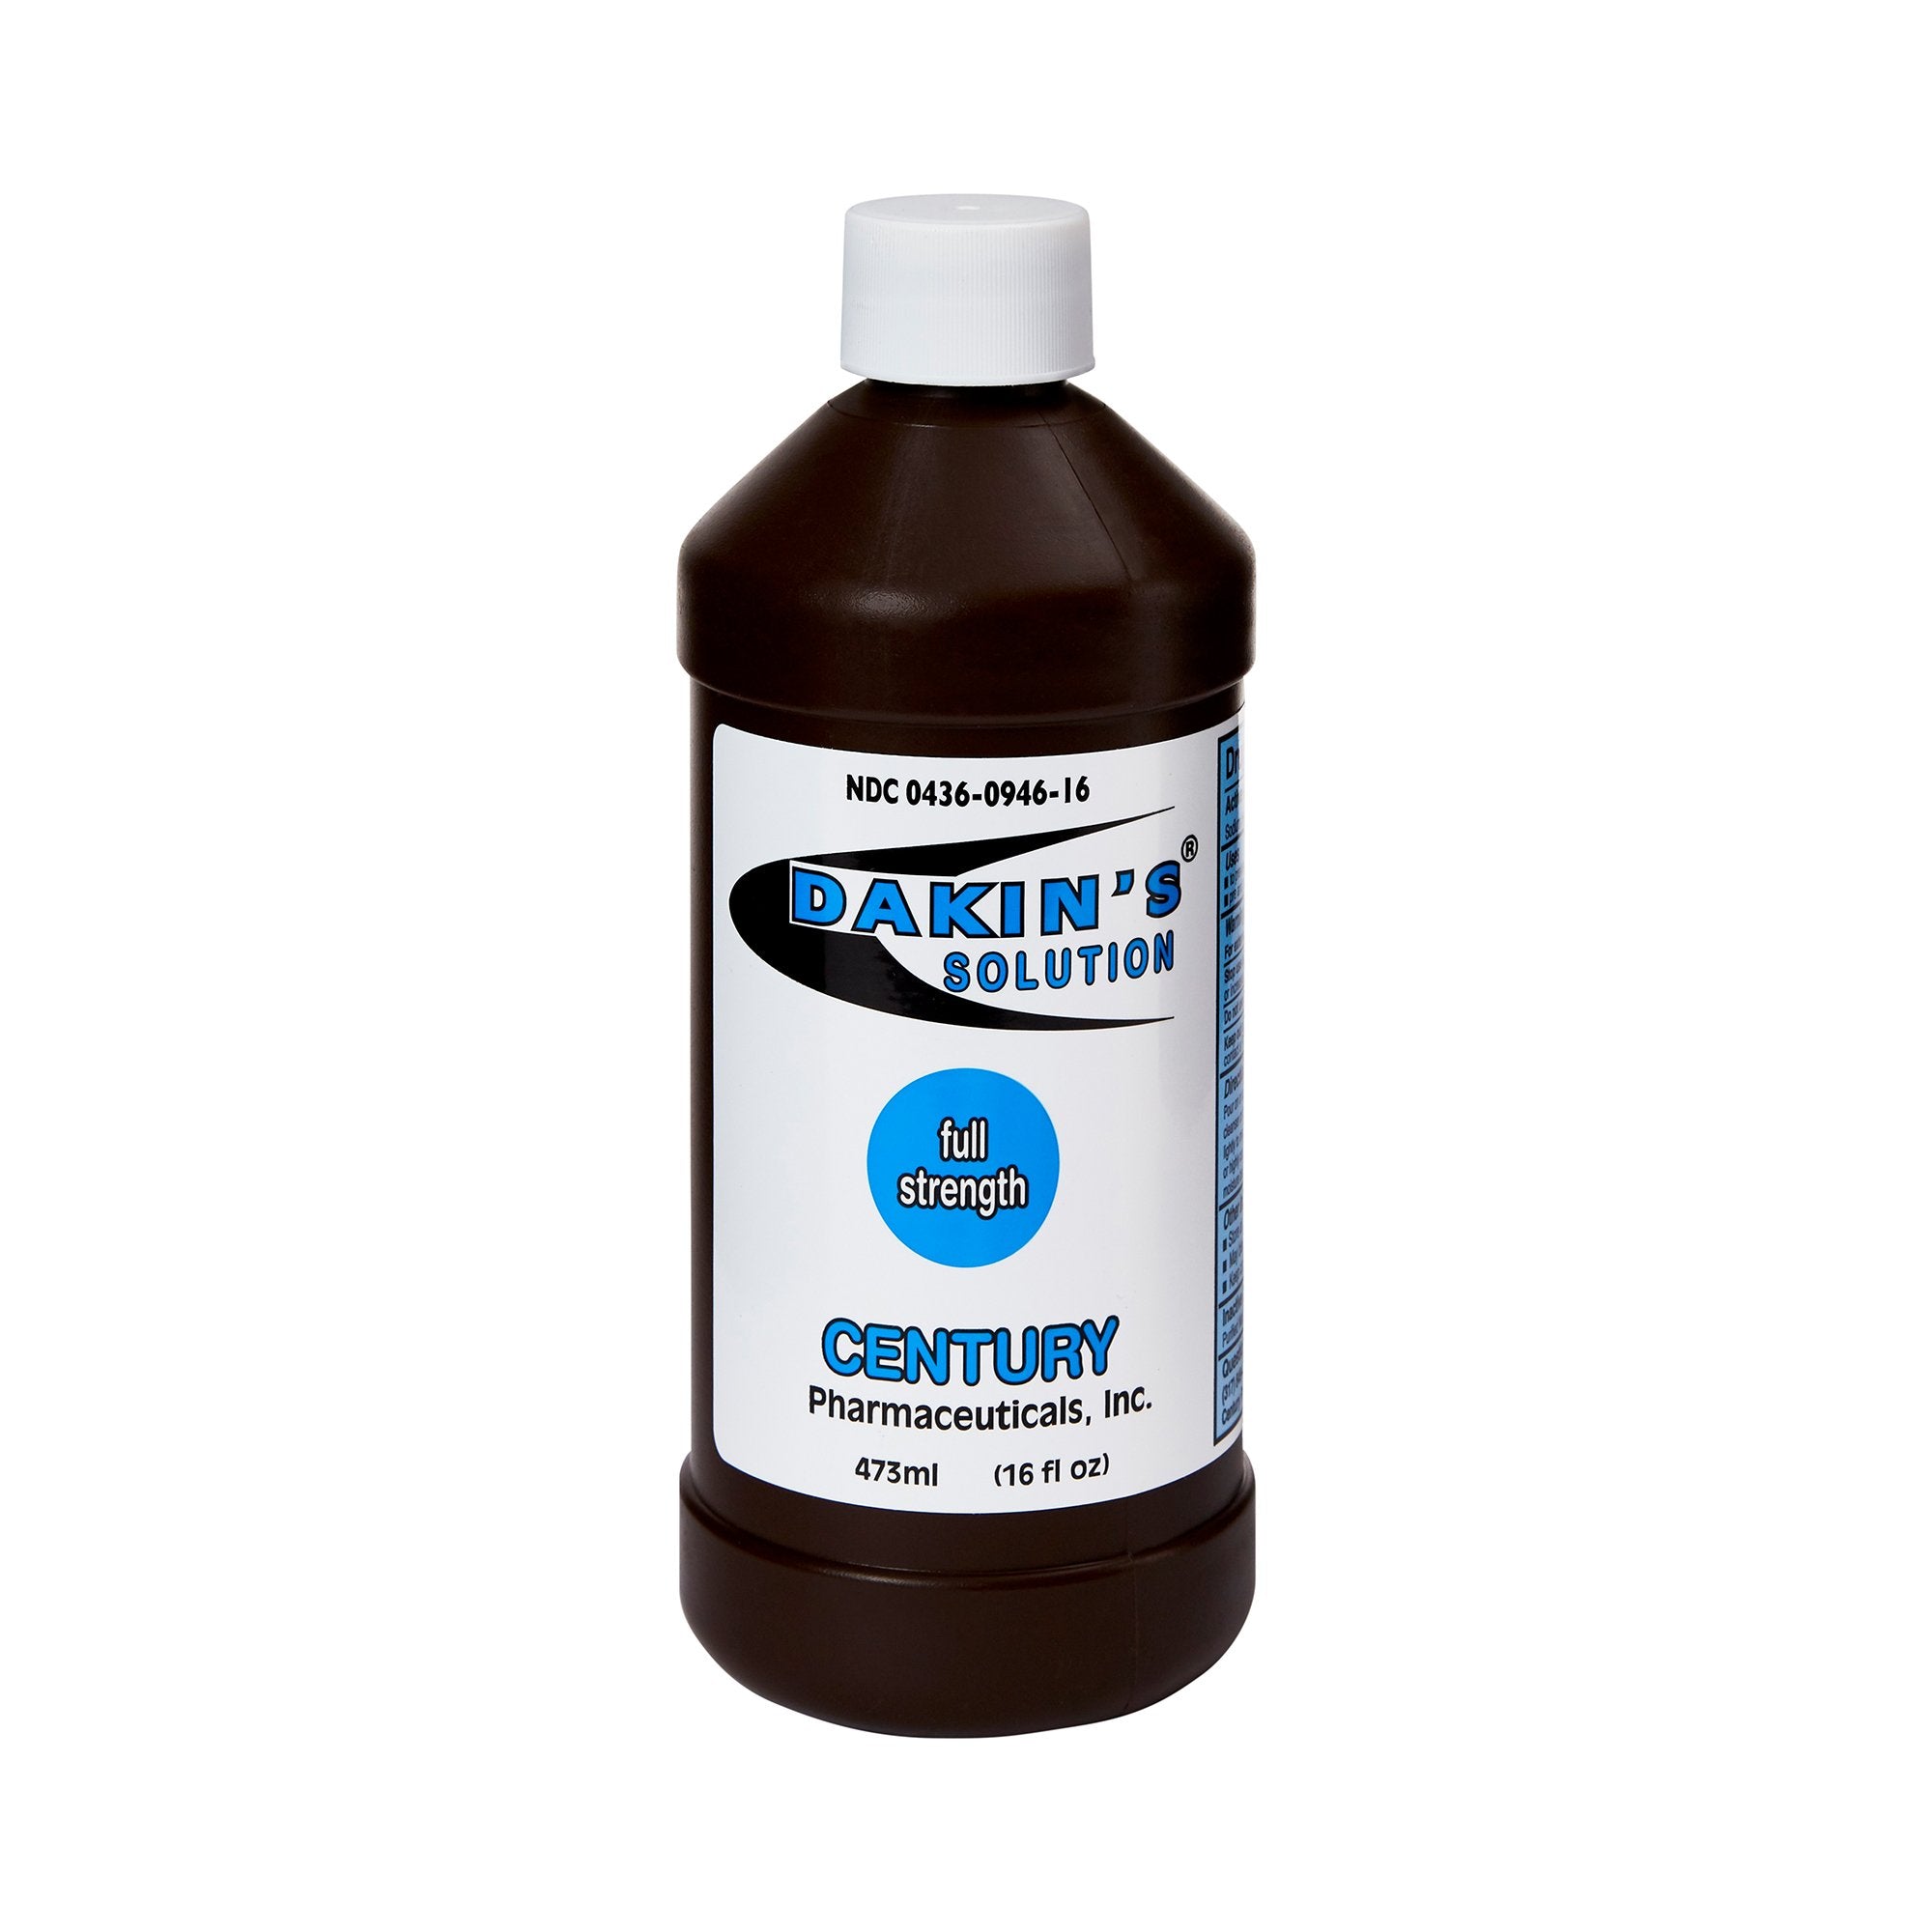 Wound Cleanser Dakin's® Solution Full Strength 16 oz. Twist Cap Bottle NonSterile Antimicrobial